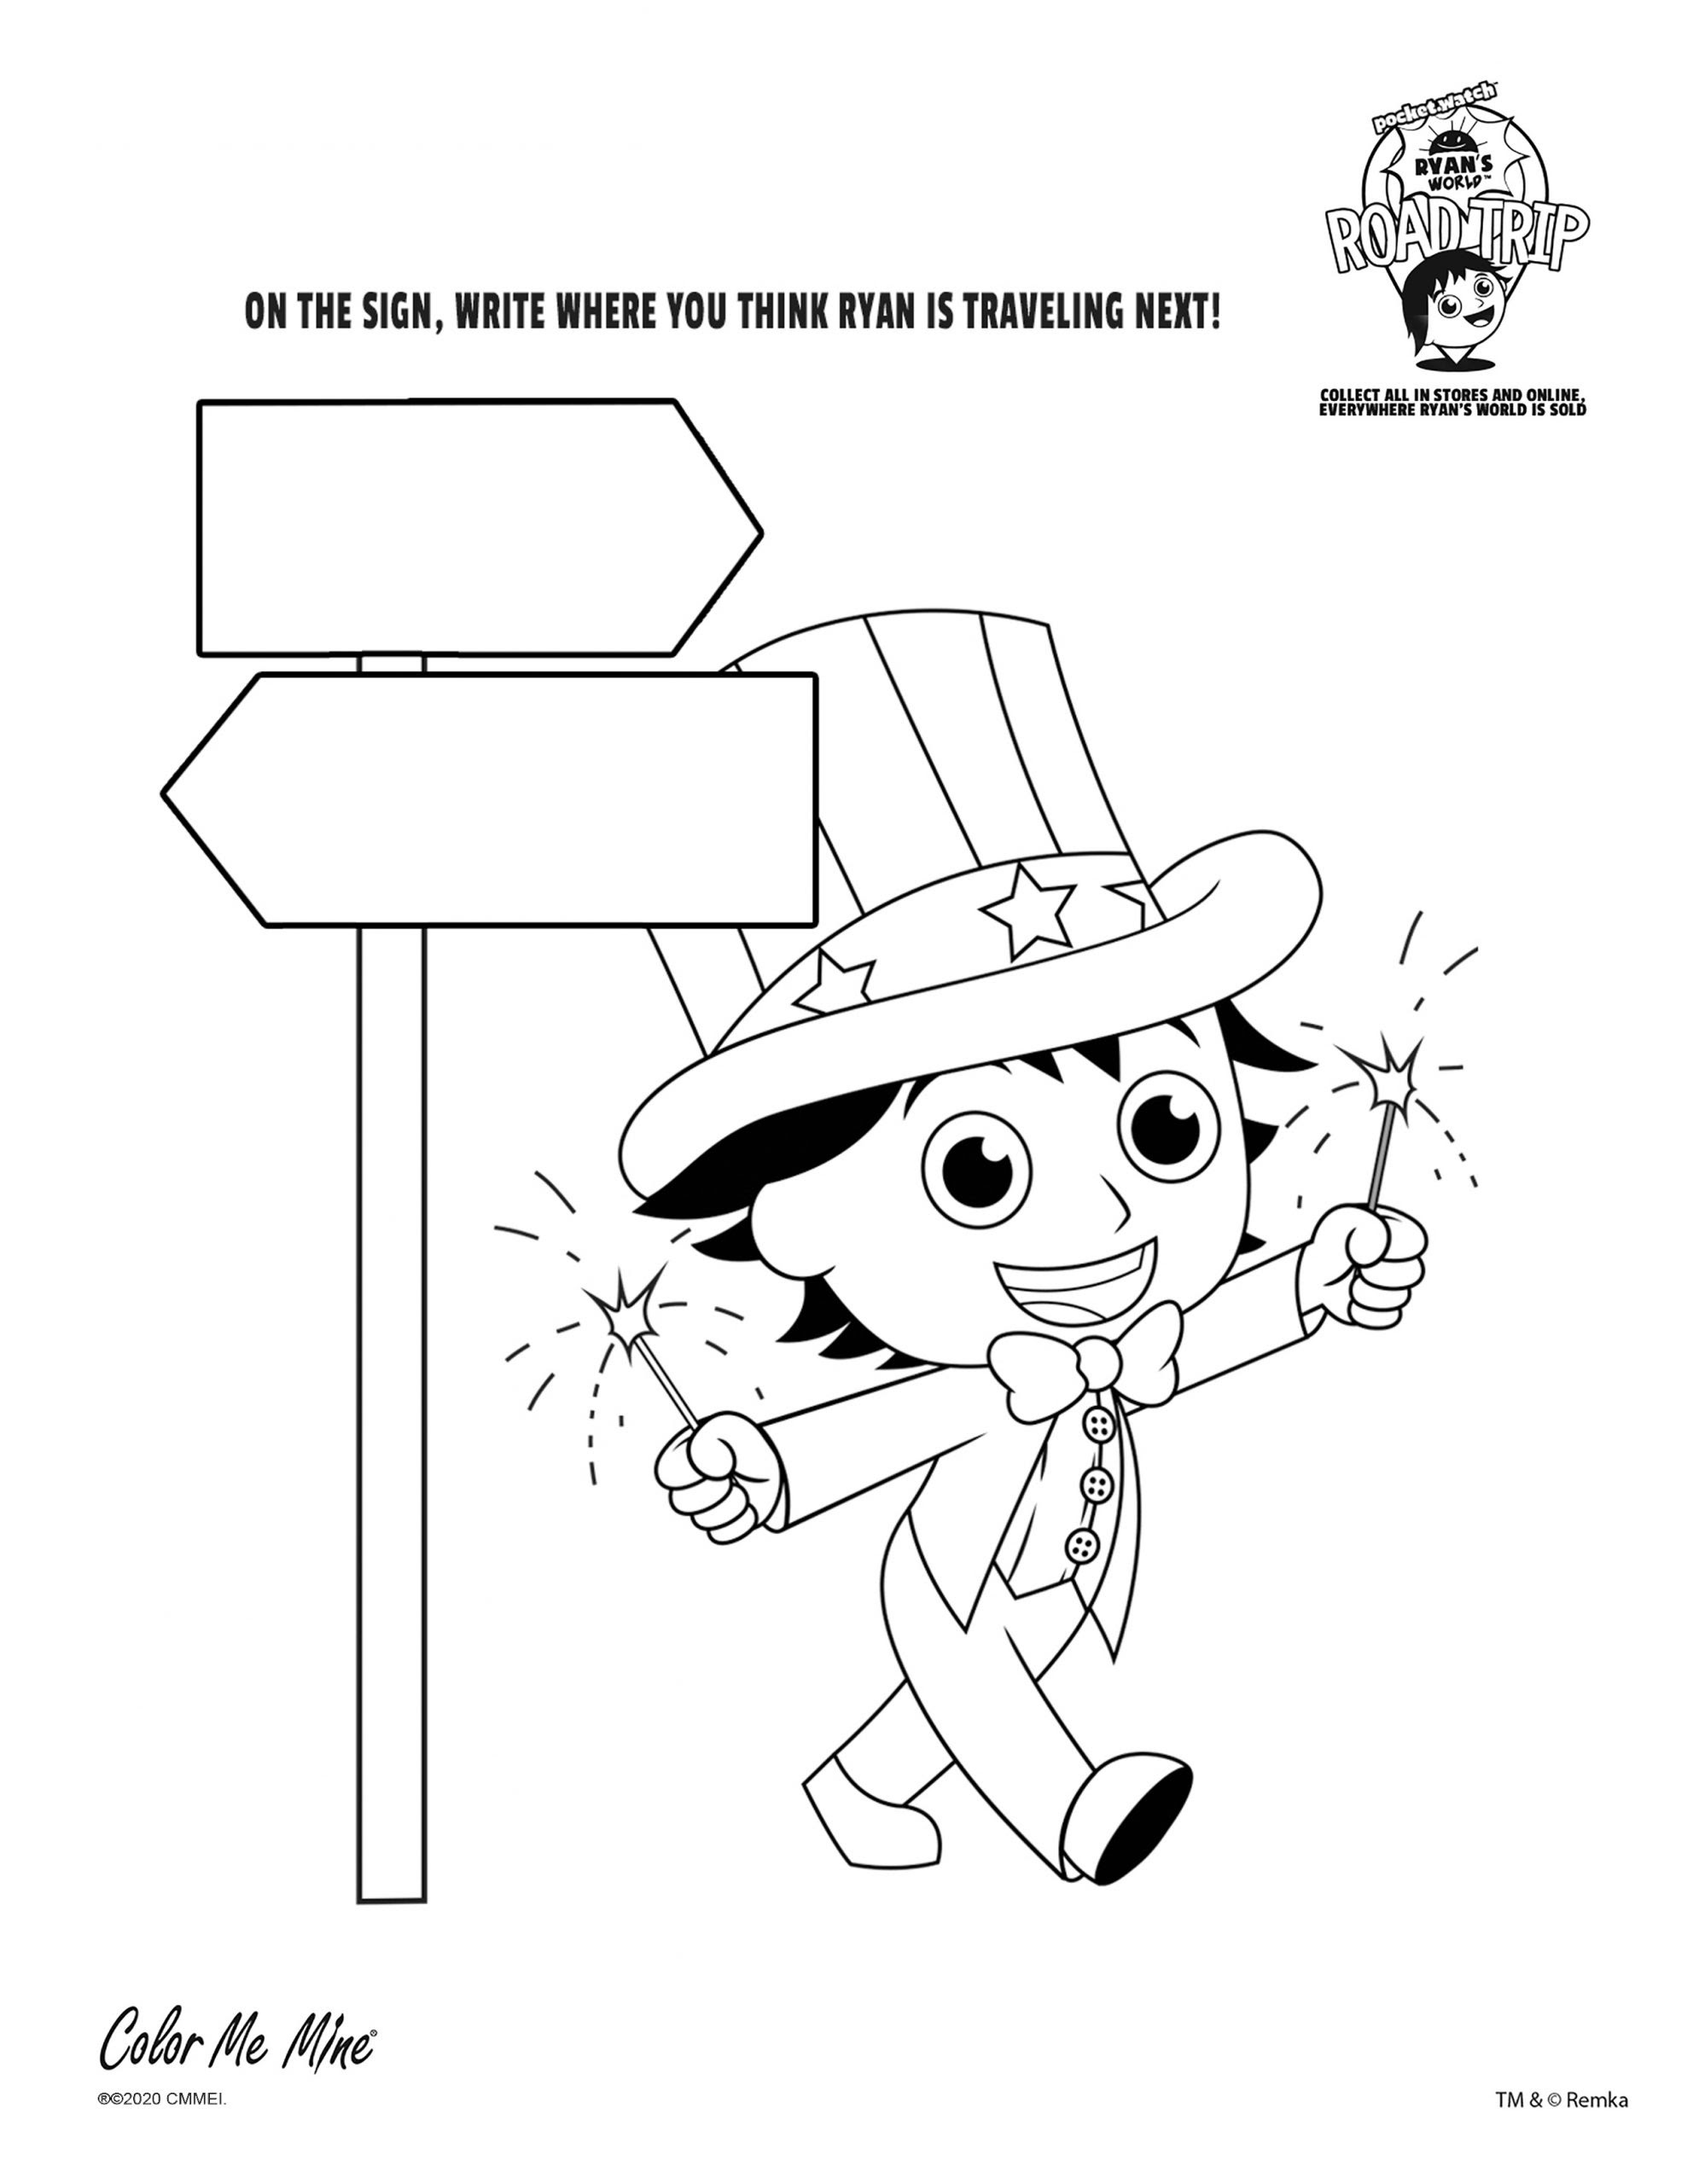 20 new unique coloring pages popular kids blogger ryan. Ryan S World Coloring Fun Edison